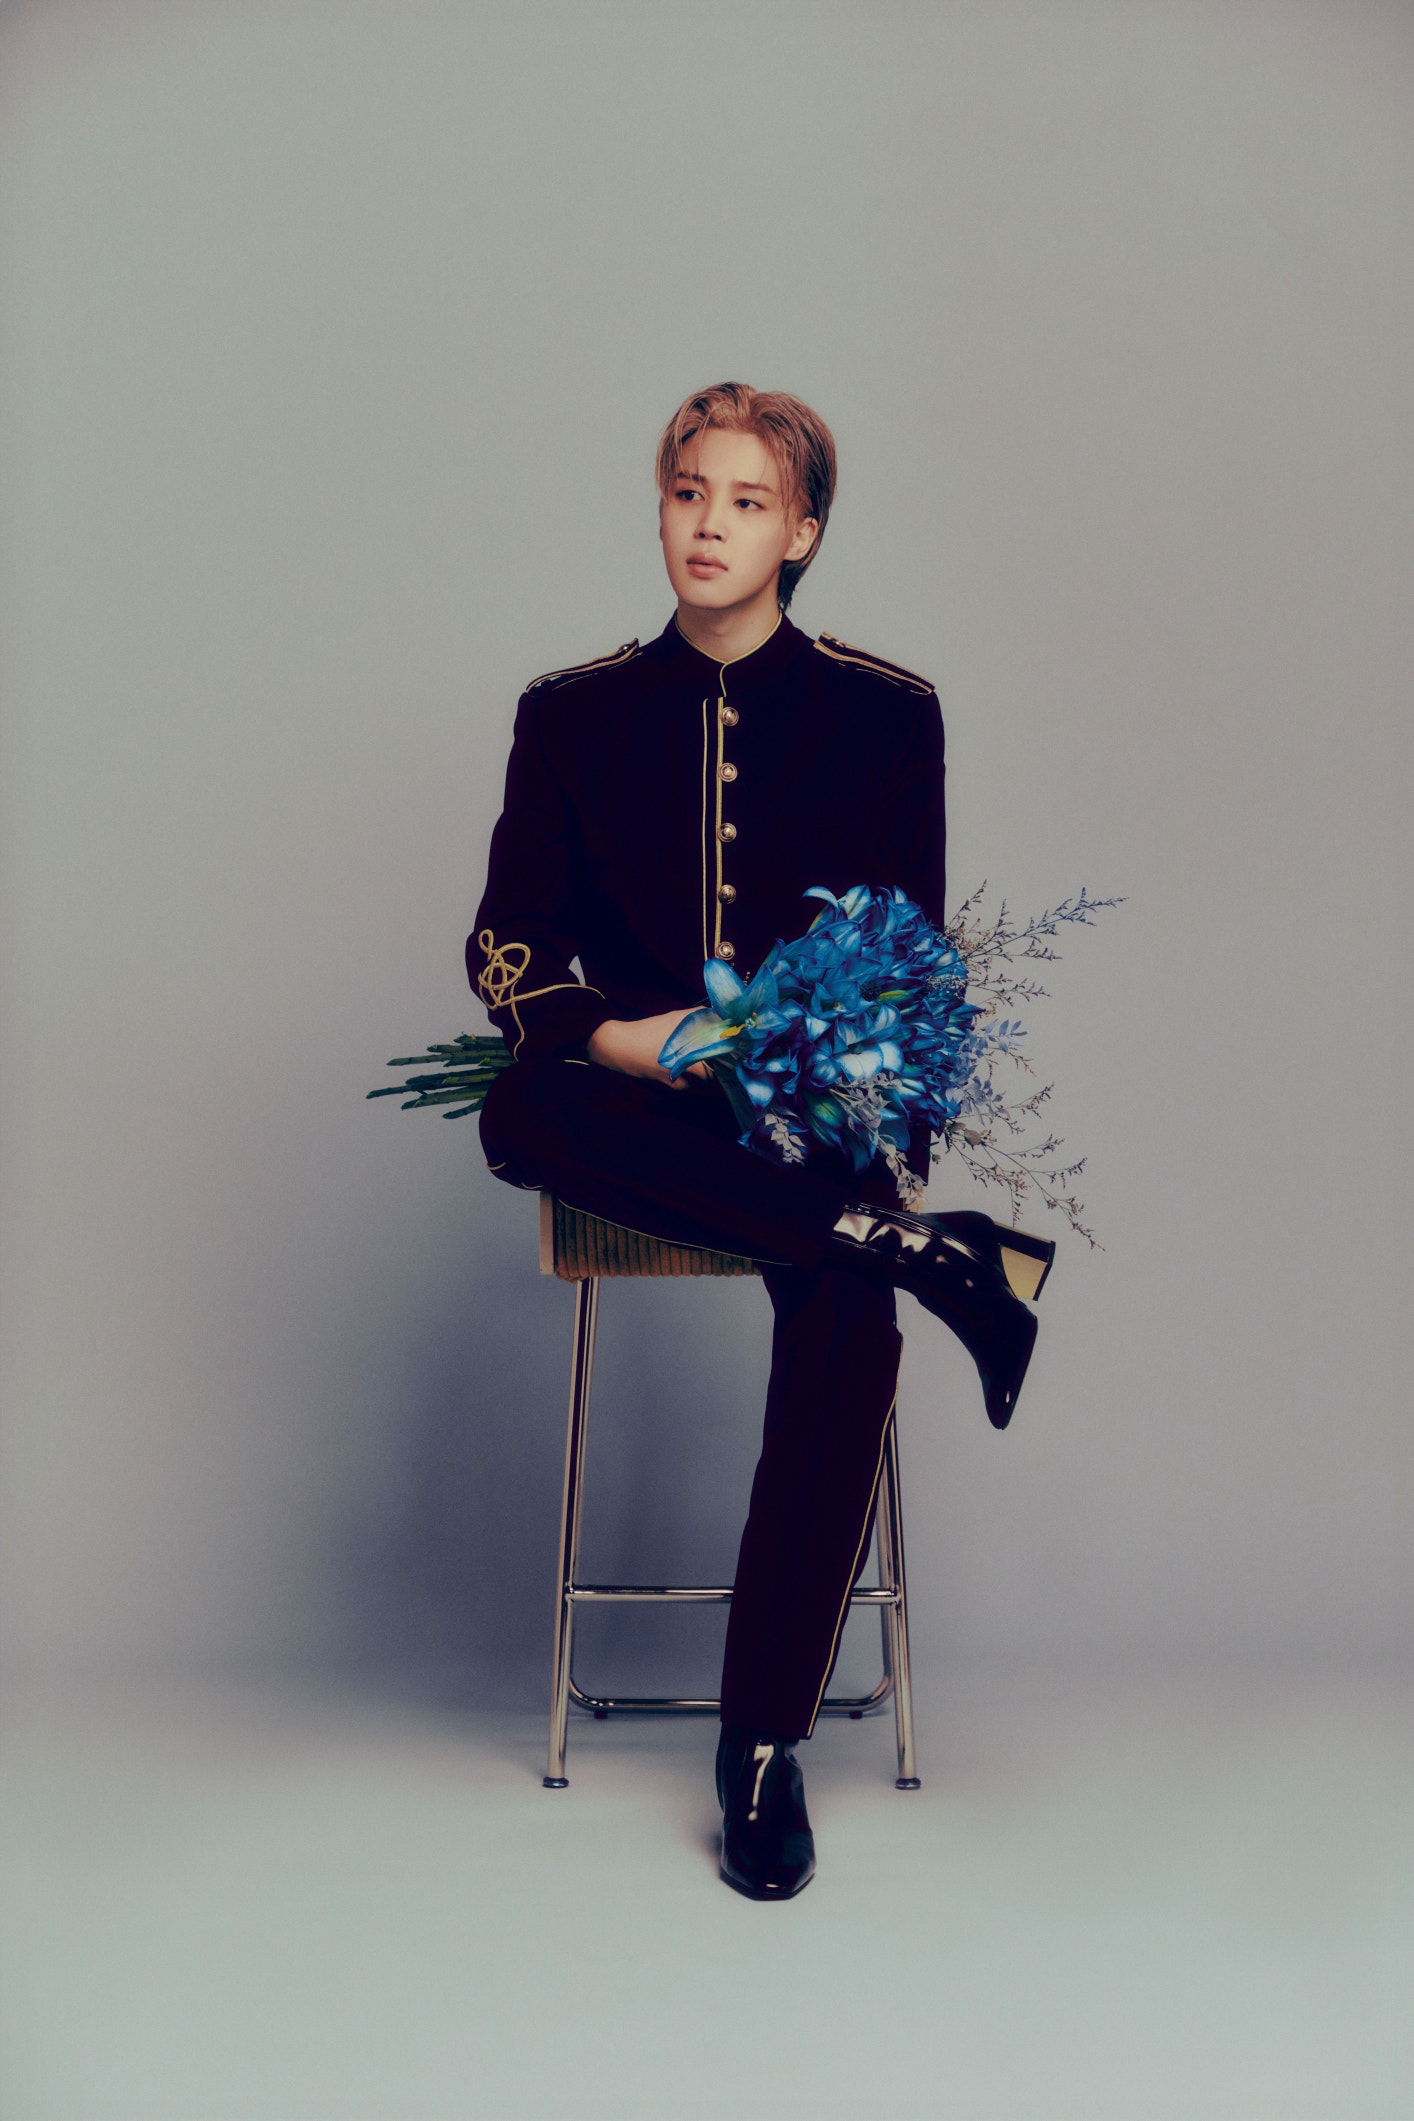 a man sitting on a stool holding flowers